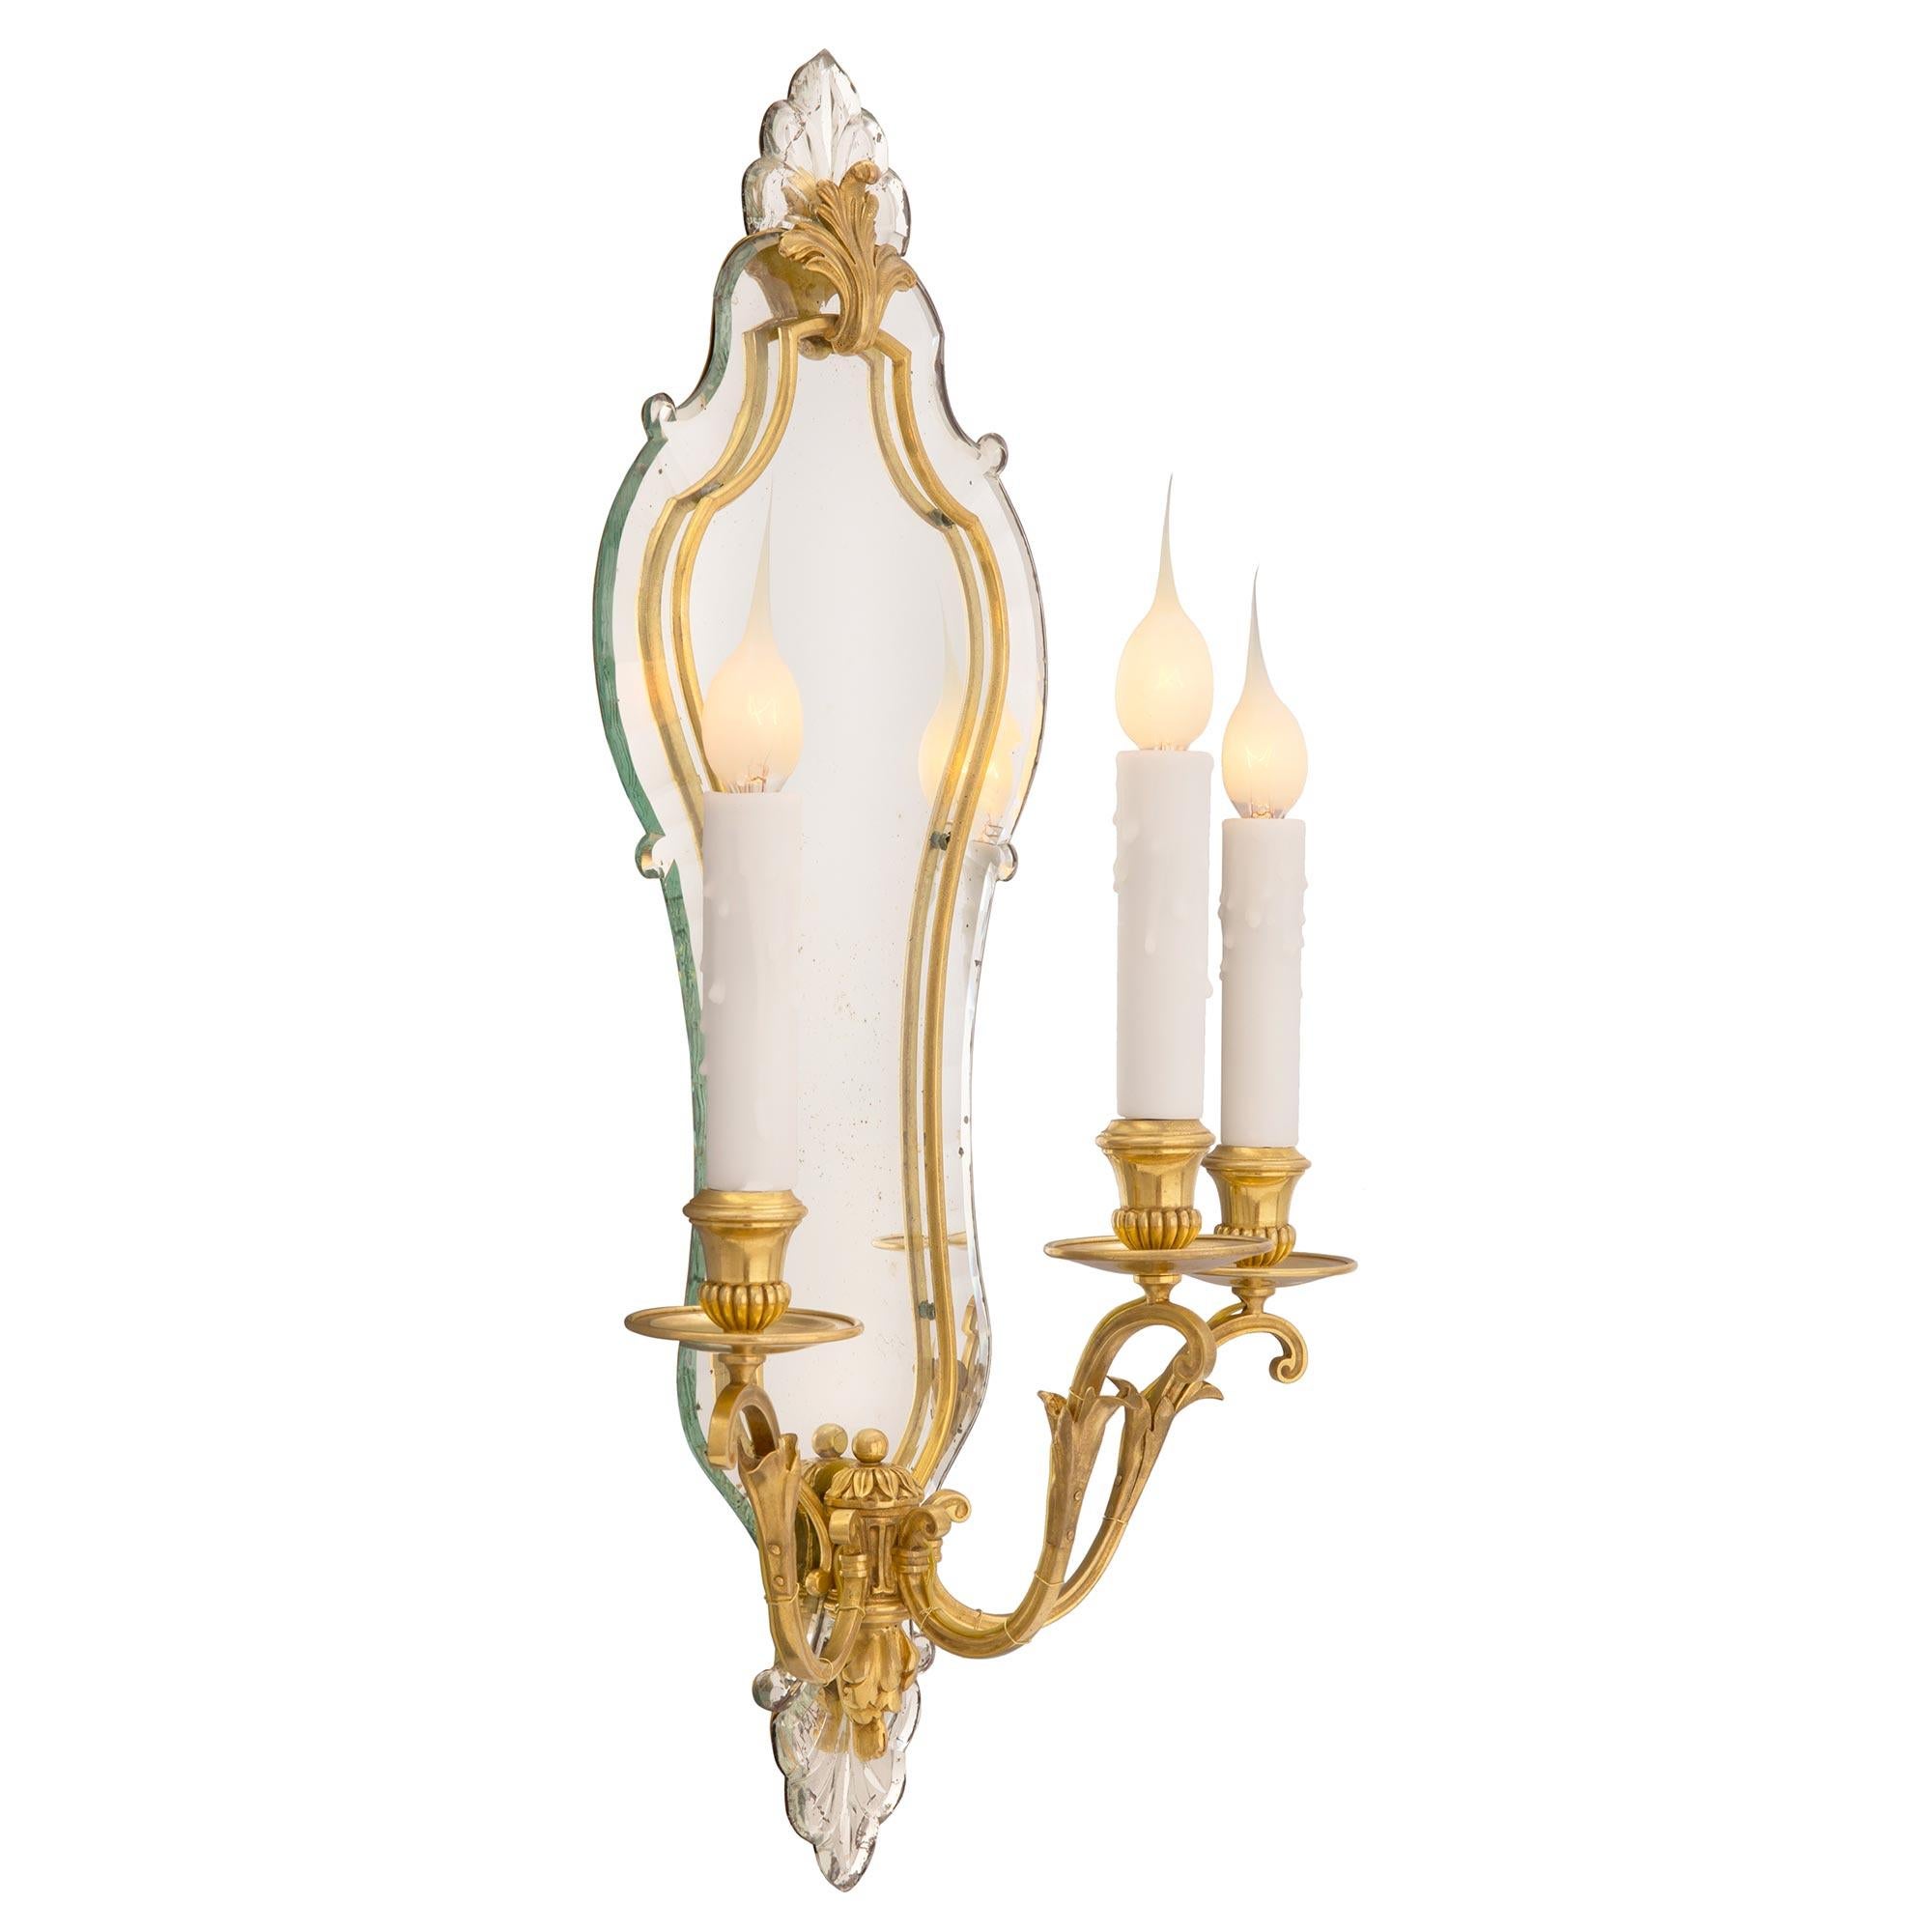 An exceptional and extremely decorative pair of French turn-of-the-century Venetian st. ormolu and mirrored sconces, likely by Maison Bagues. Each three arm sconce displays a stunning scalloped shaped mirrored backplate with impressive wonderfully